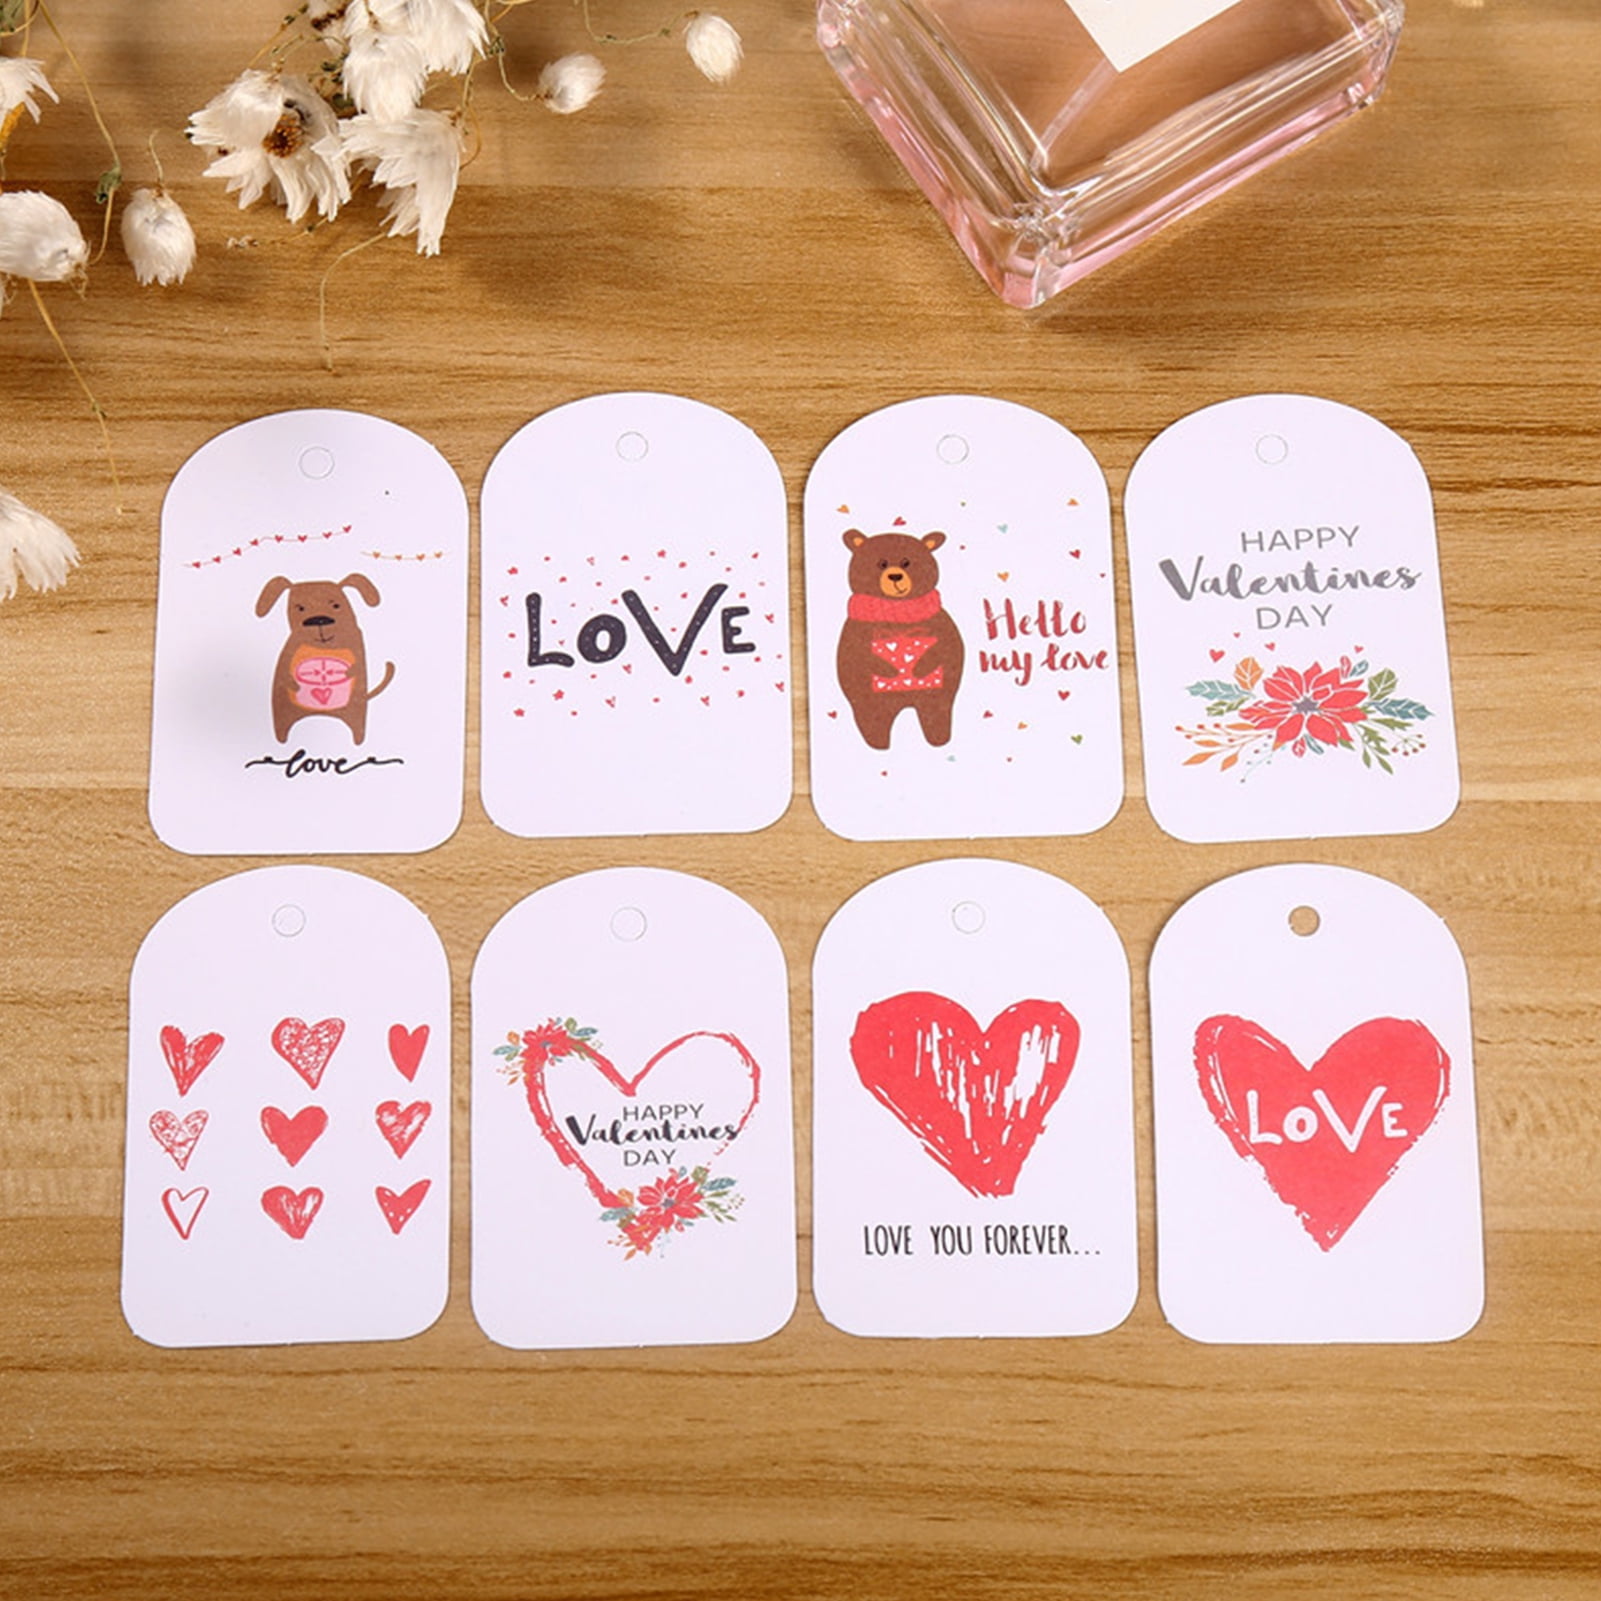 100PCS Party Package Hanging Handmade Gift Tags Tag Cards Price Label Red Heart 